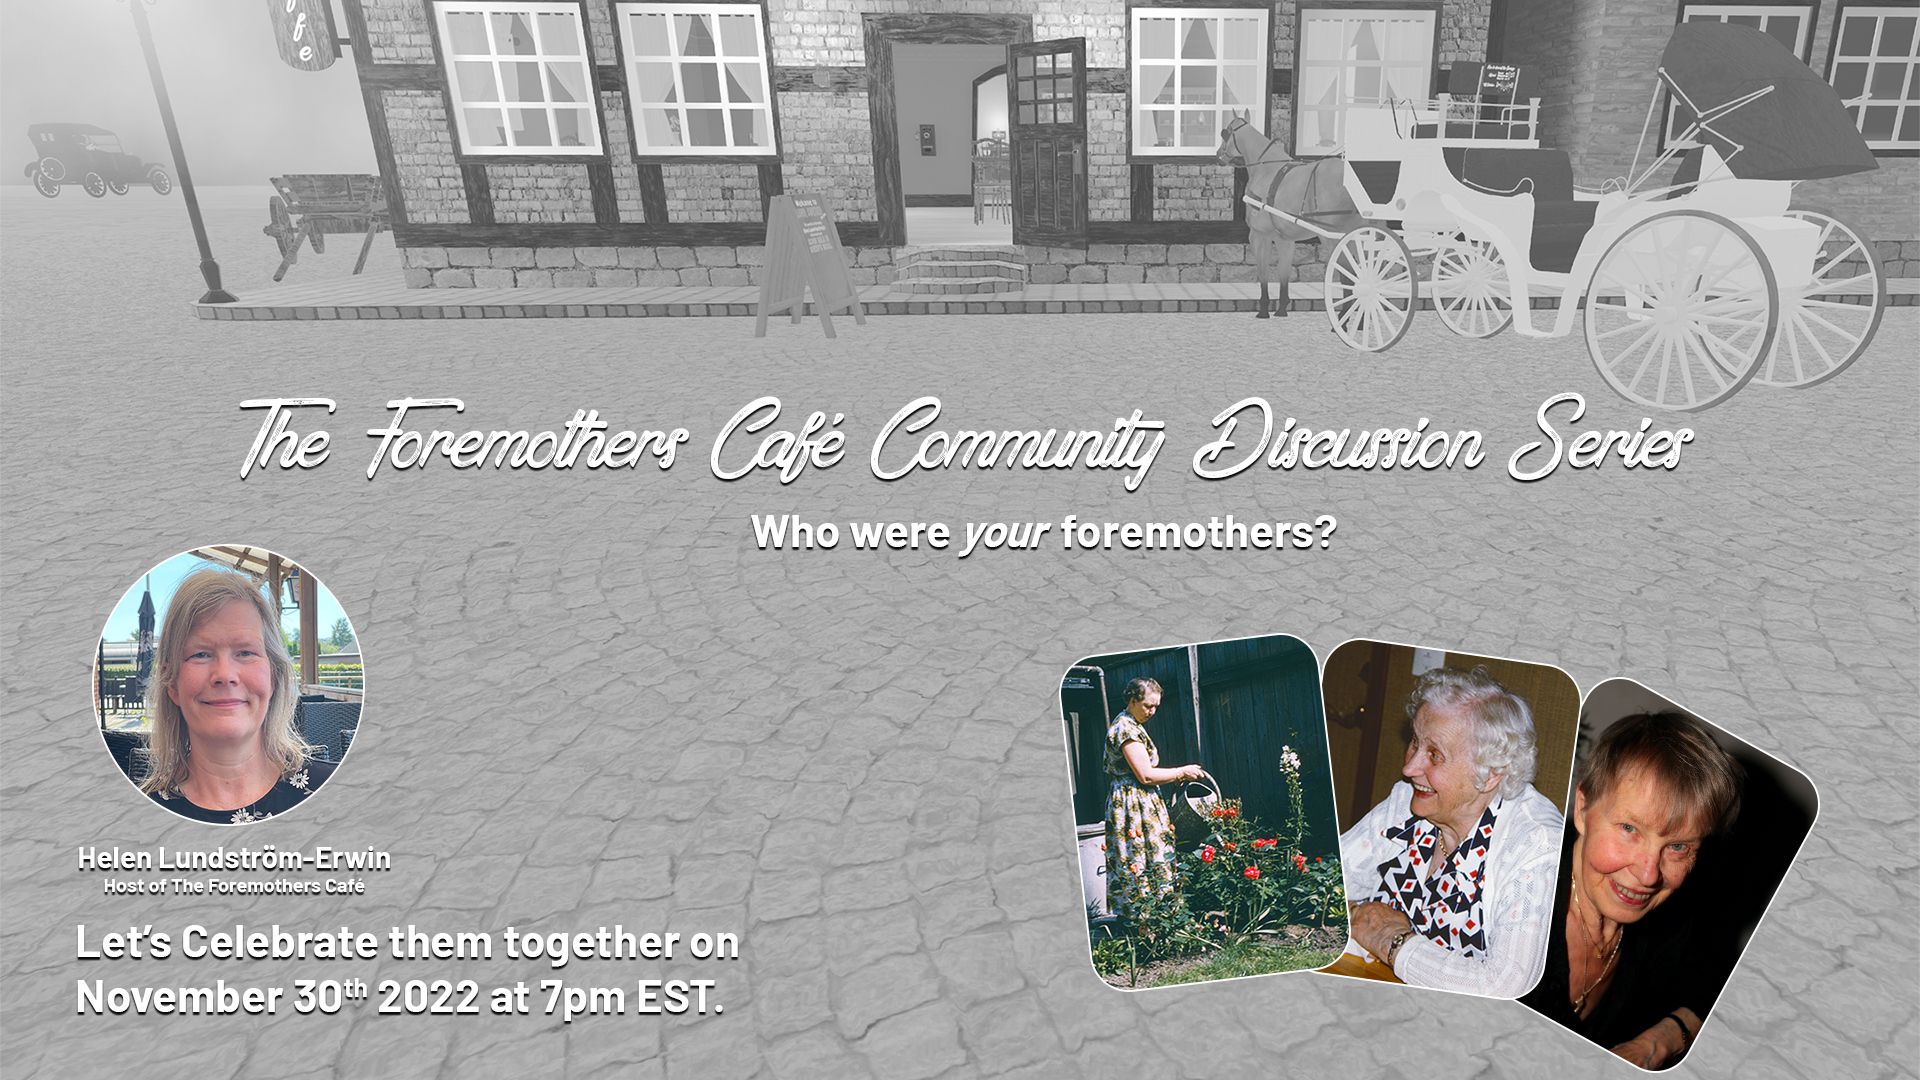 Foremothers Cafe Community Discussion Series - Who were your foremothers? Author Helen Lundstrom Erwin